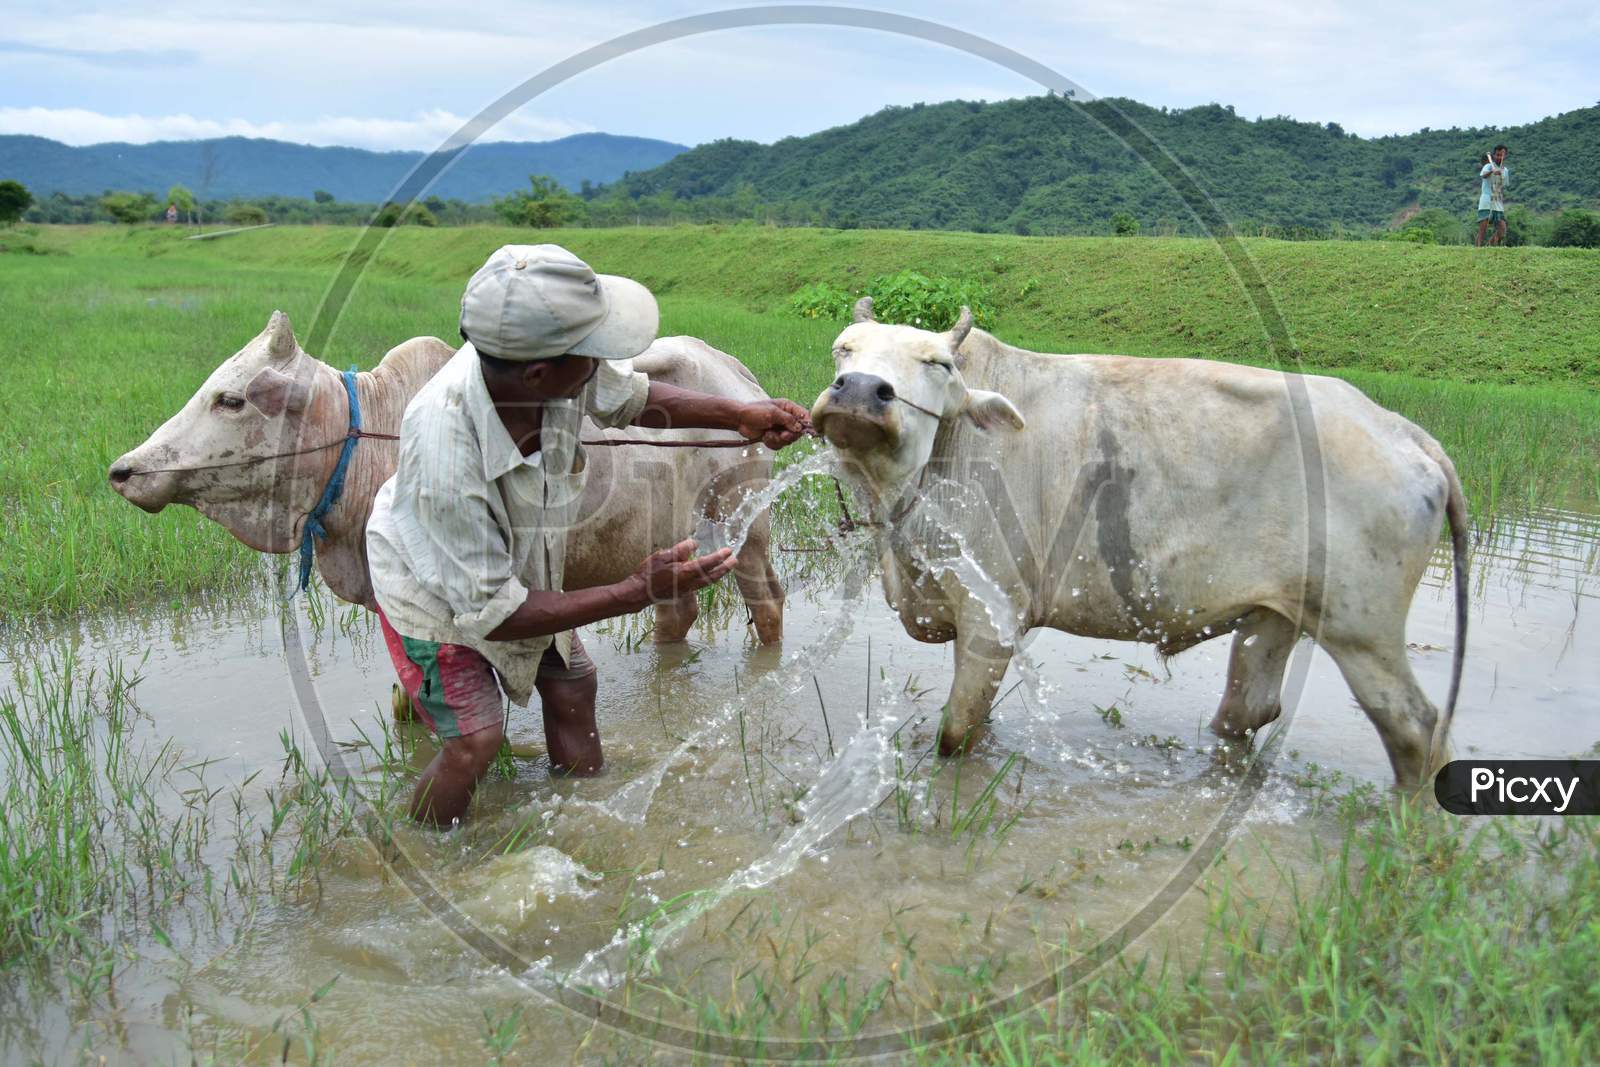 A farmer cleans his cattle after he plowed his field for paddy plantation at a village in Nagaon, Assam on July 11, 2020